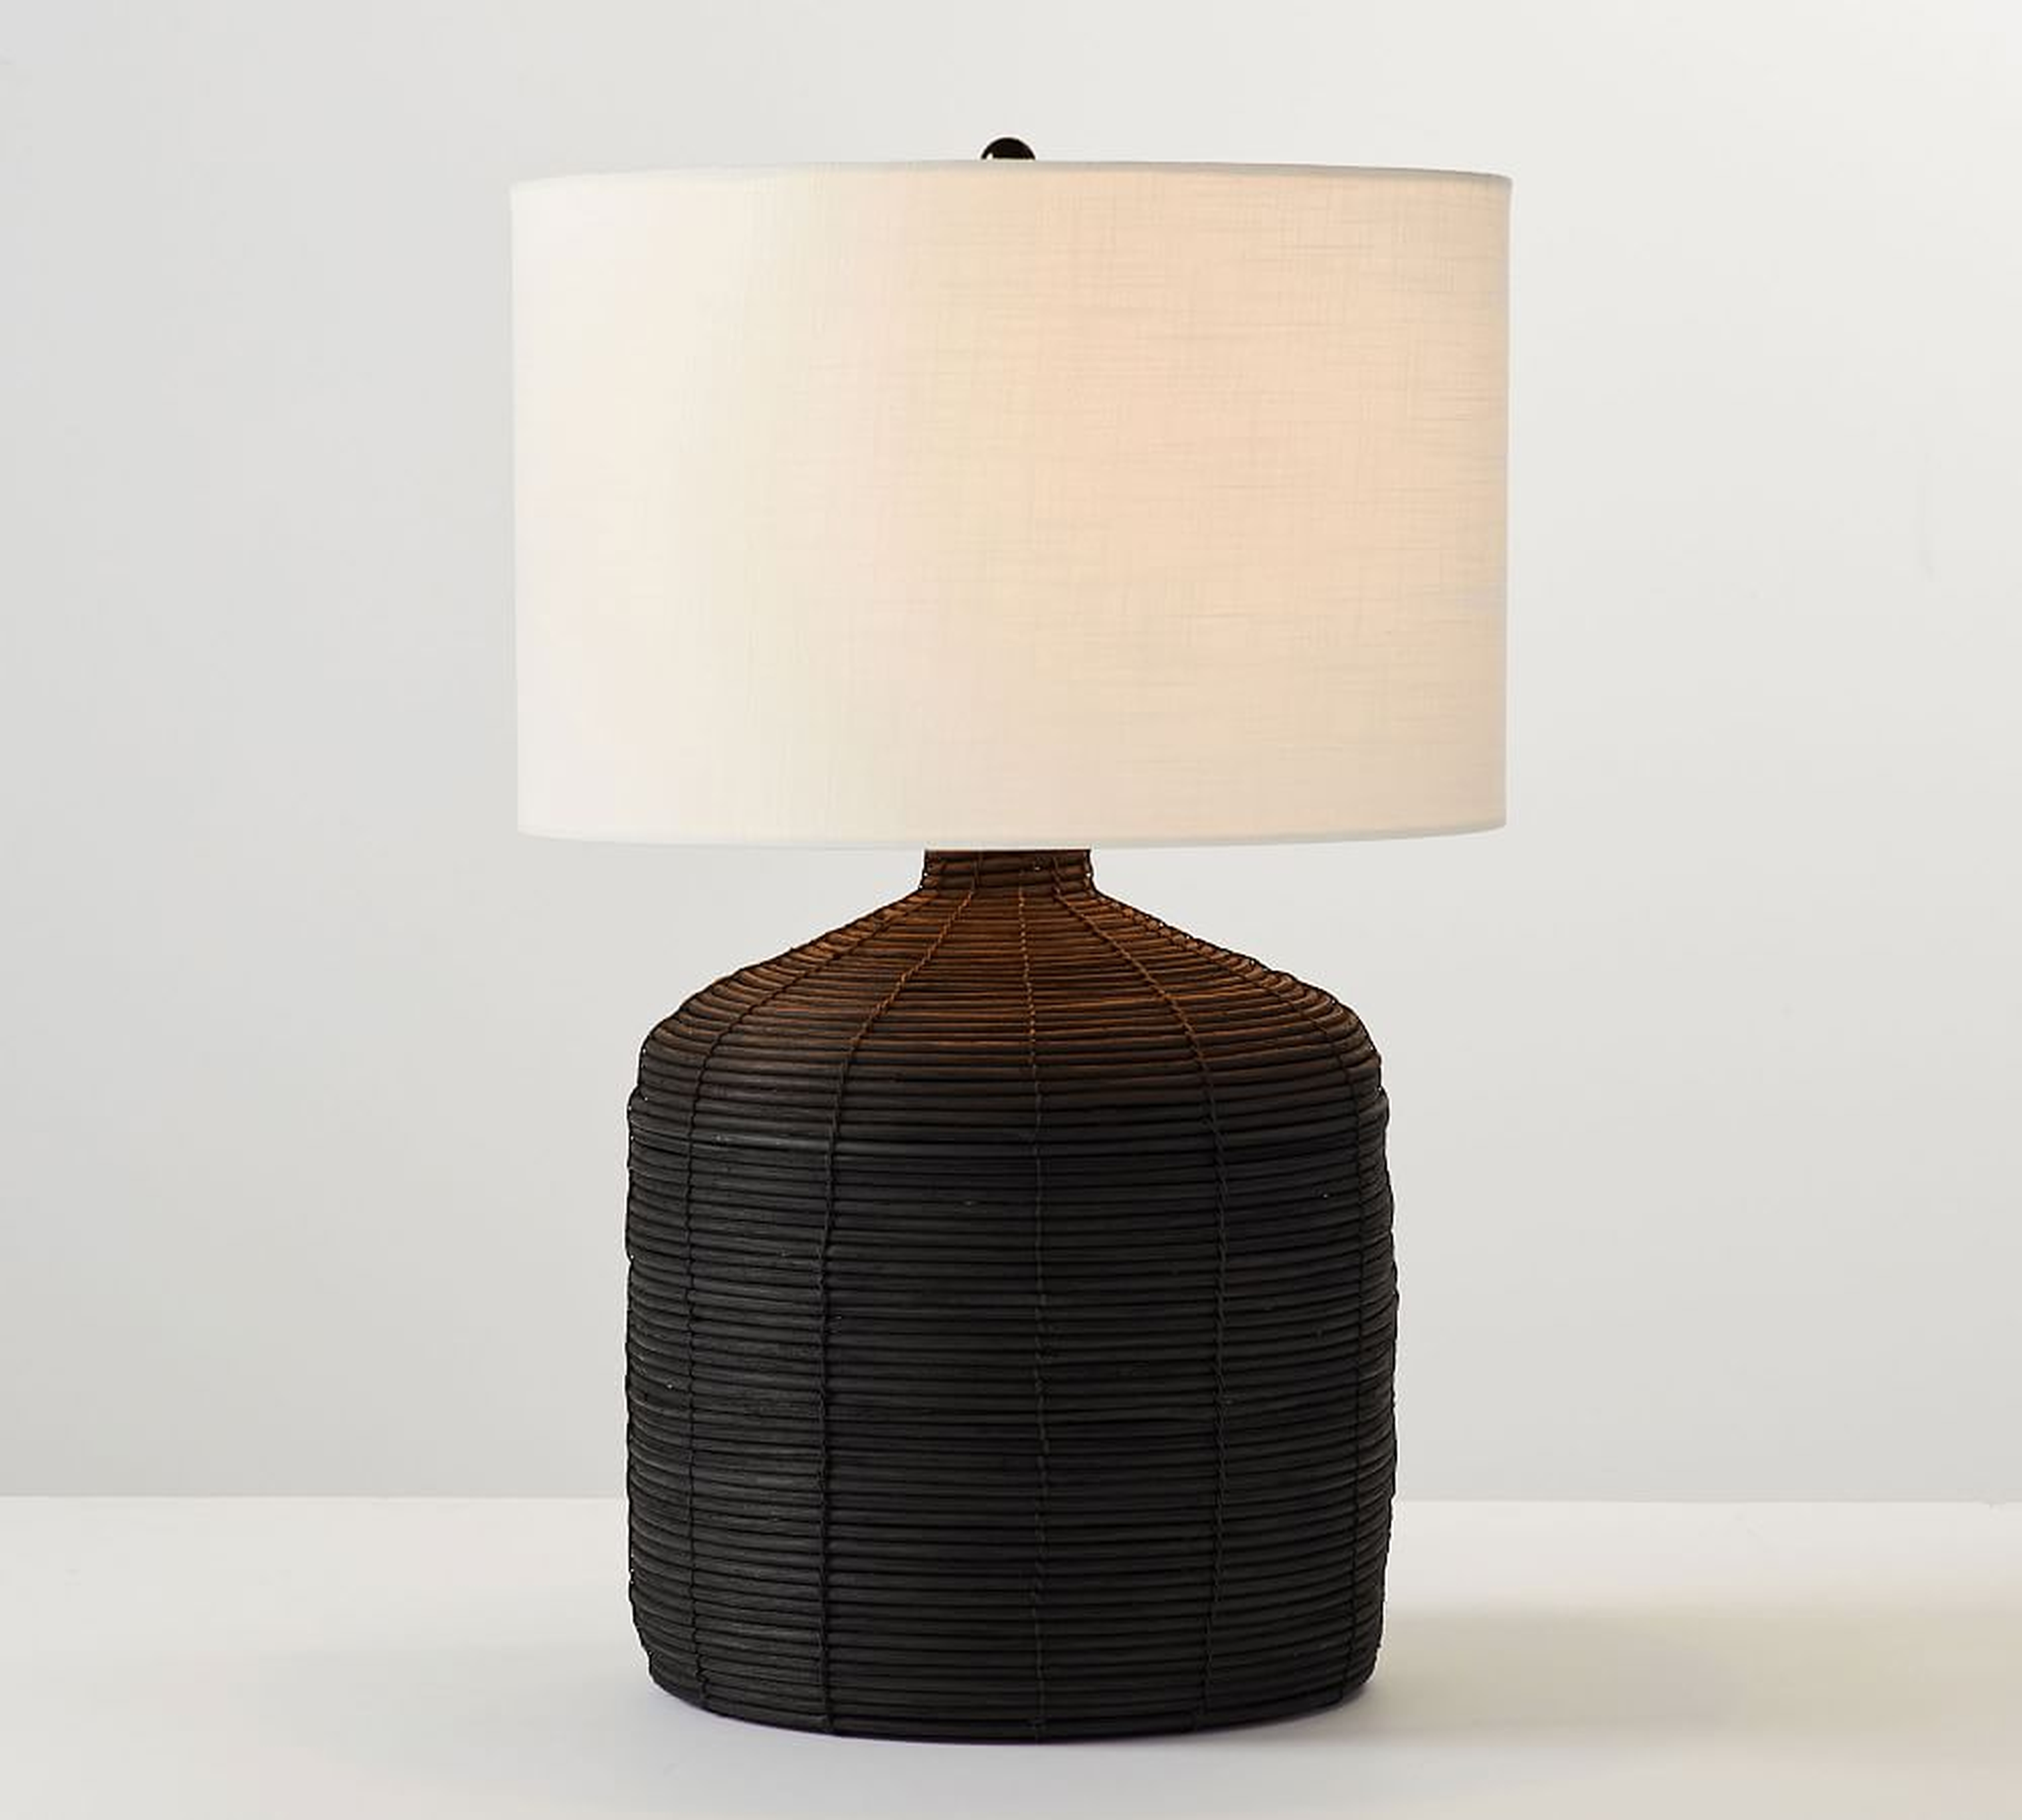 Cambria Seagrass Table Lamp with XL SS Gallery Shade, Black, Large - Pottery Barn